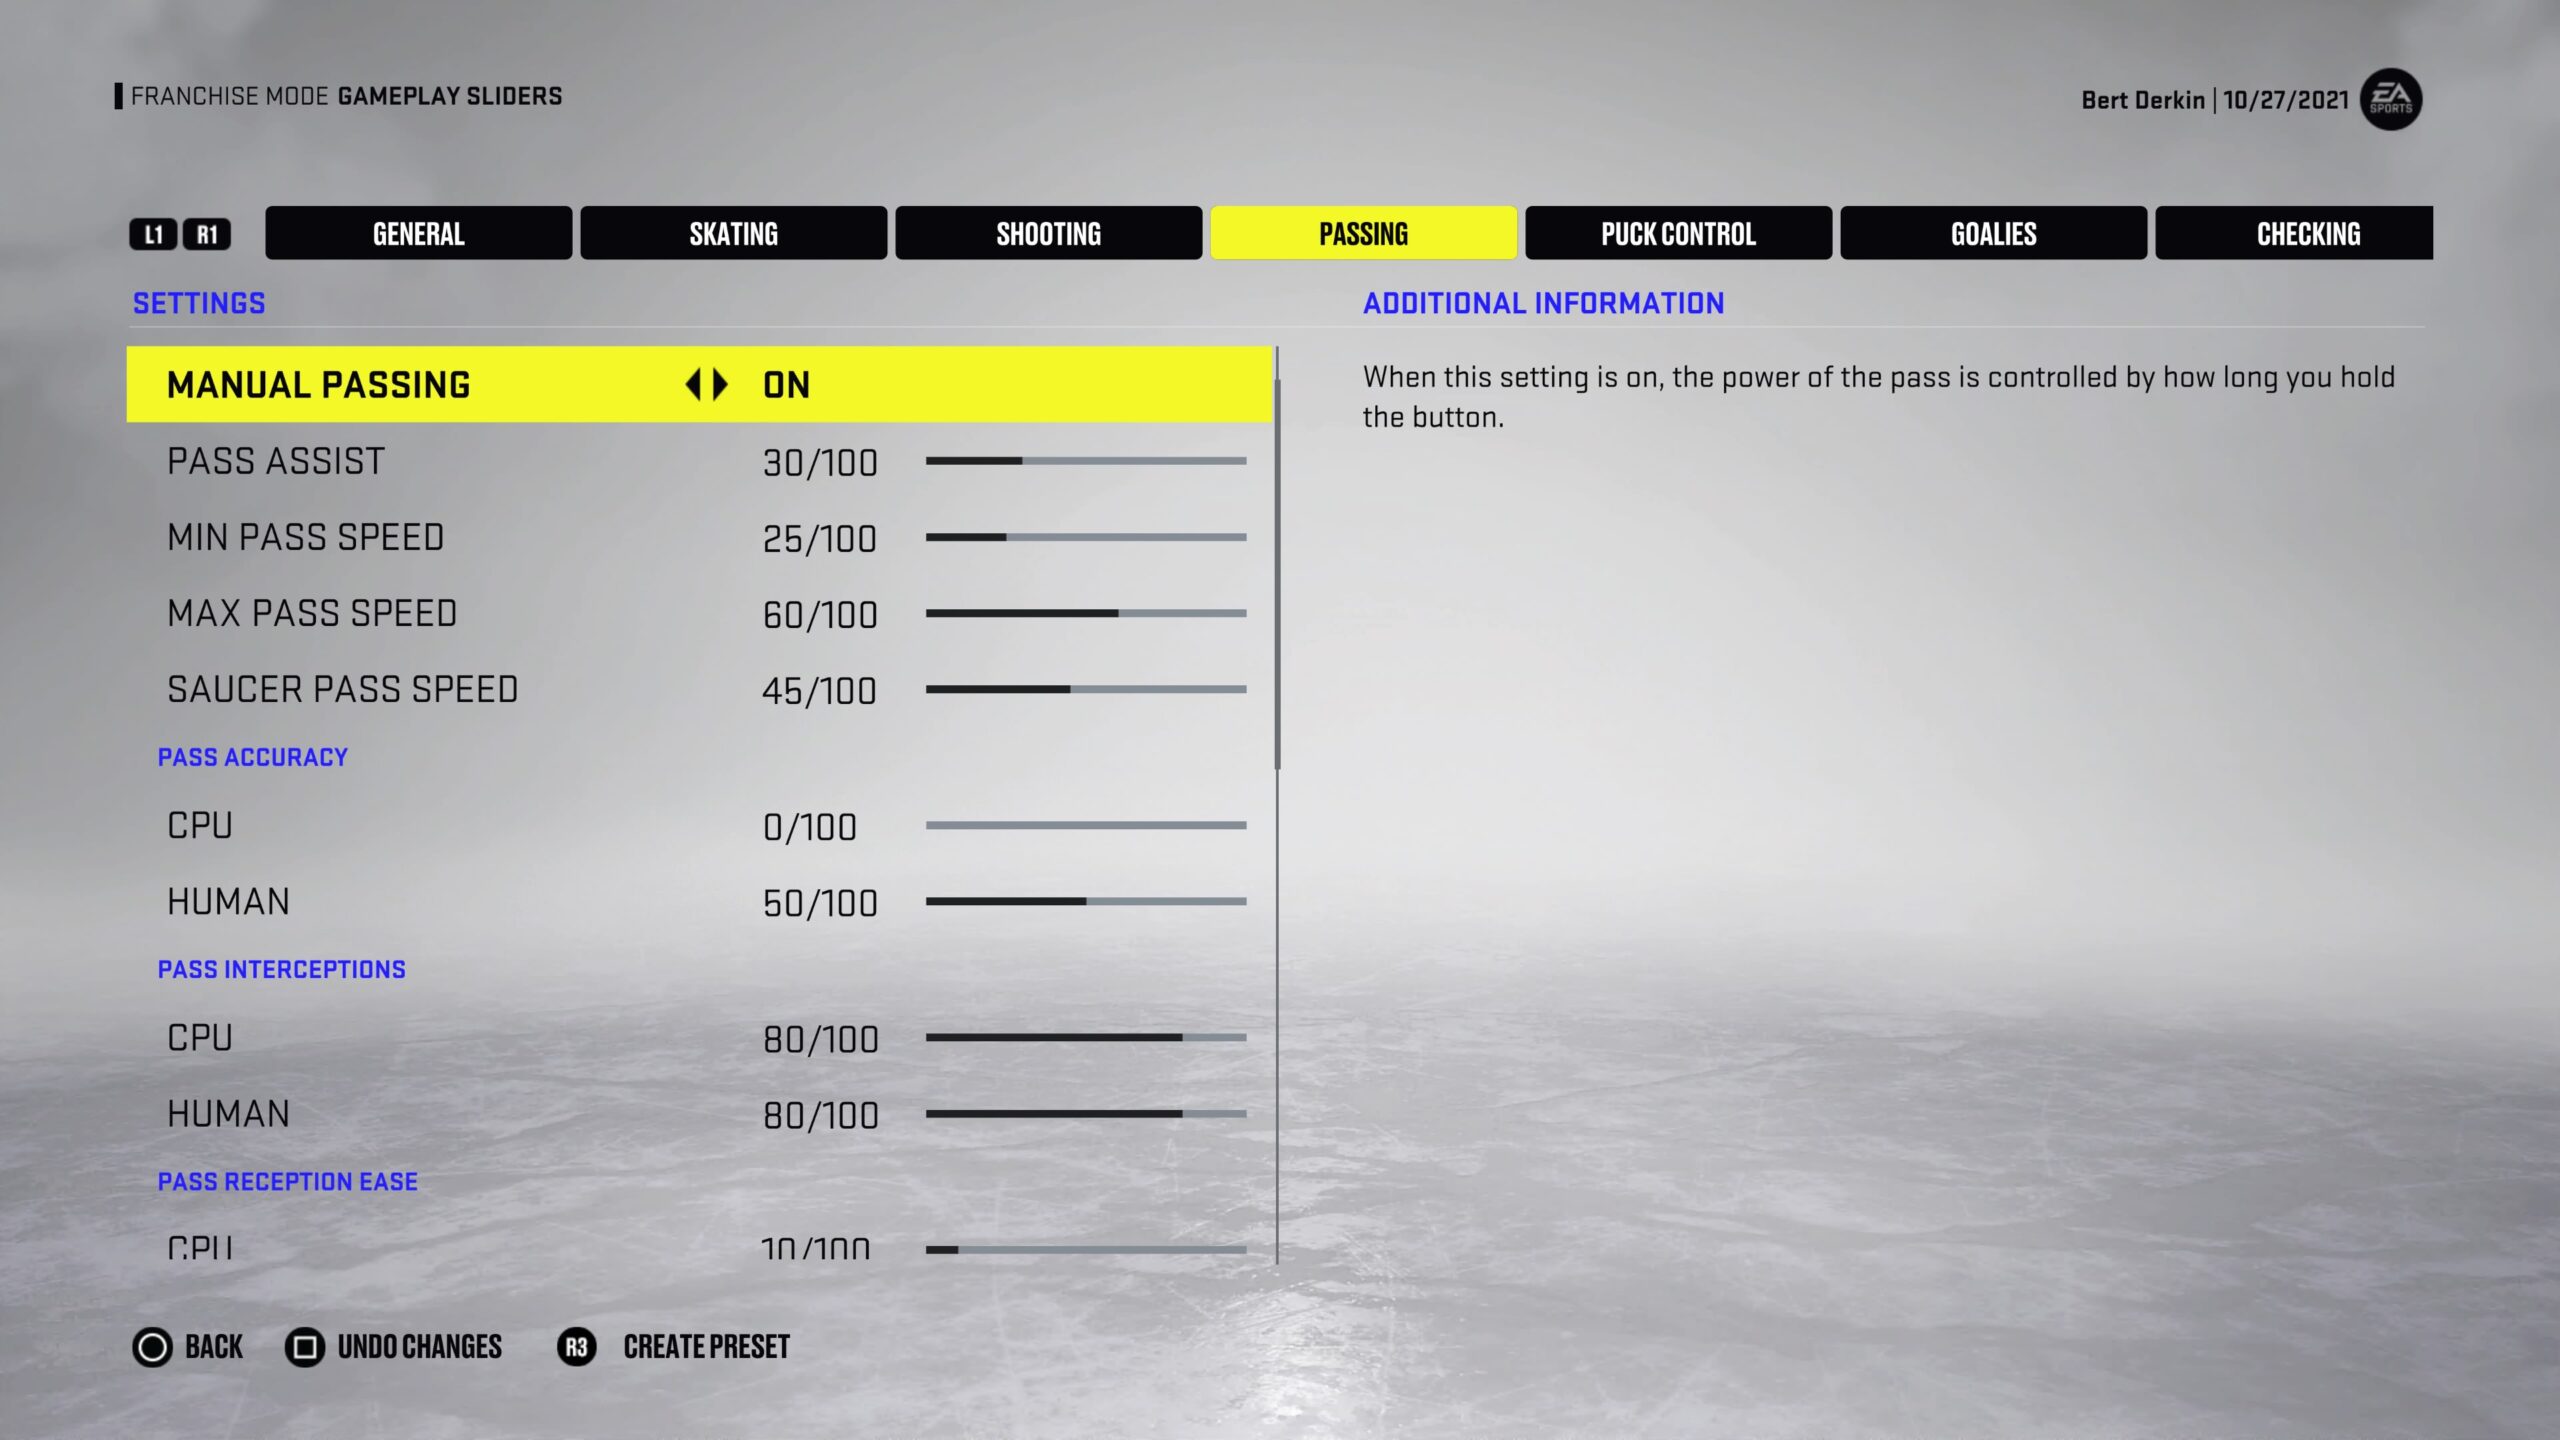 NHL 22 December Patch Notes